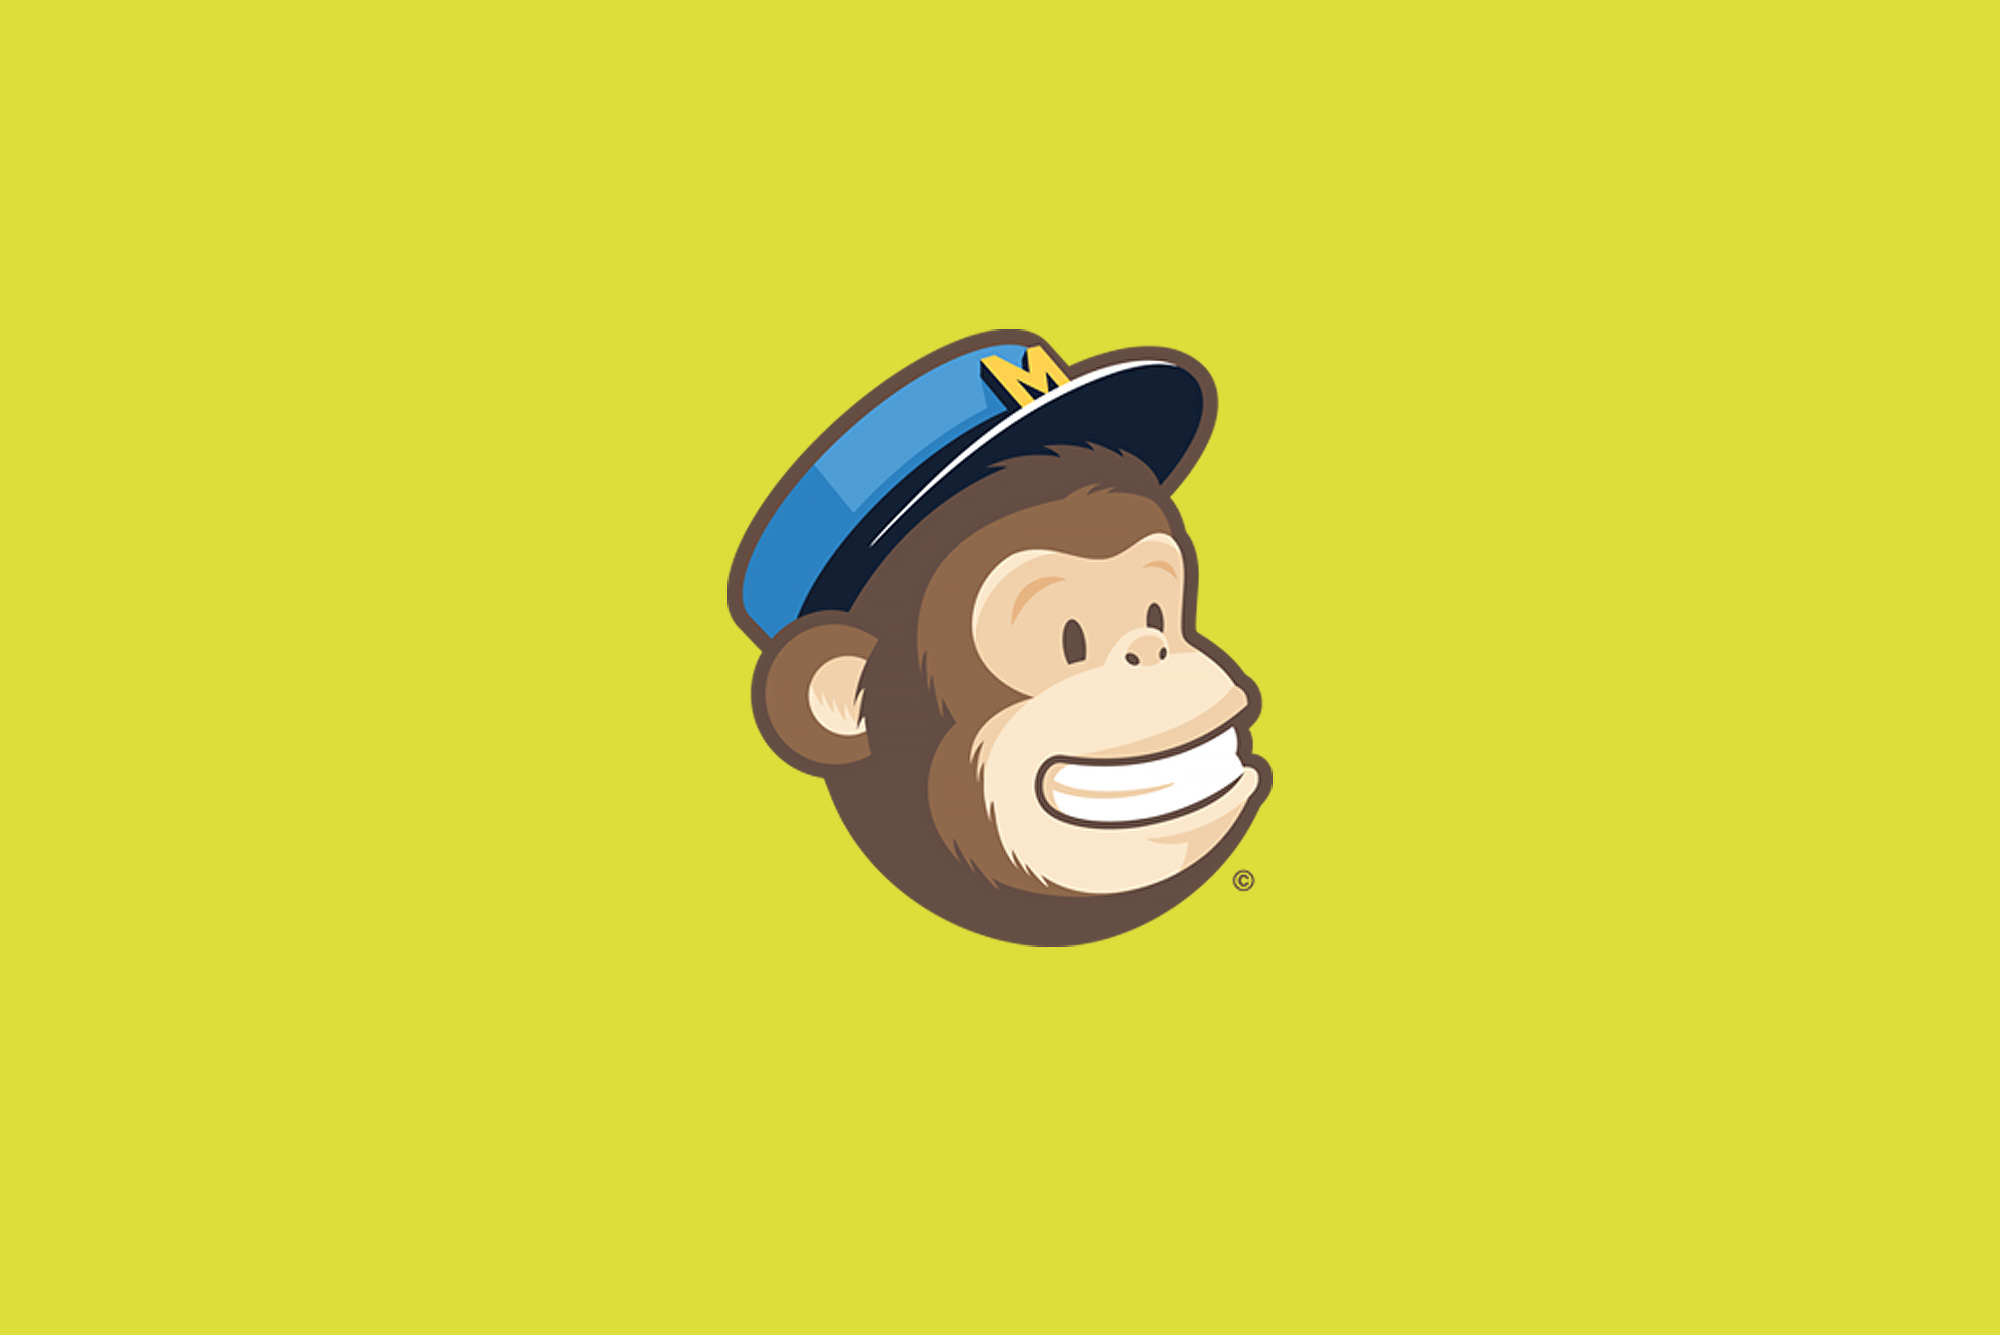 Mail Chimp logo on yellow background - Benefits of Email Marketing